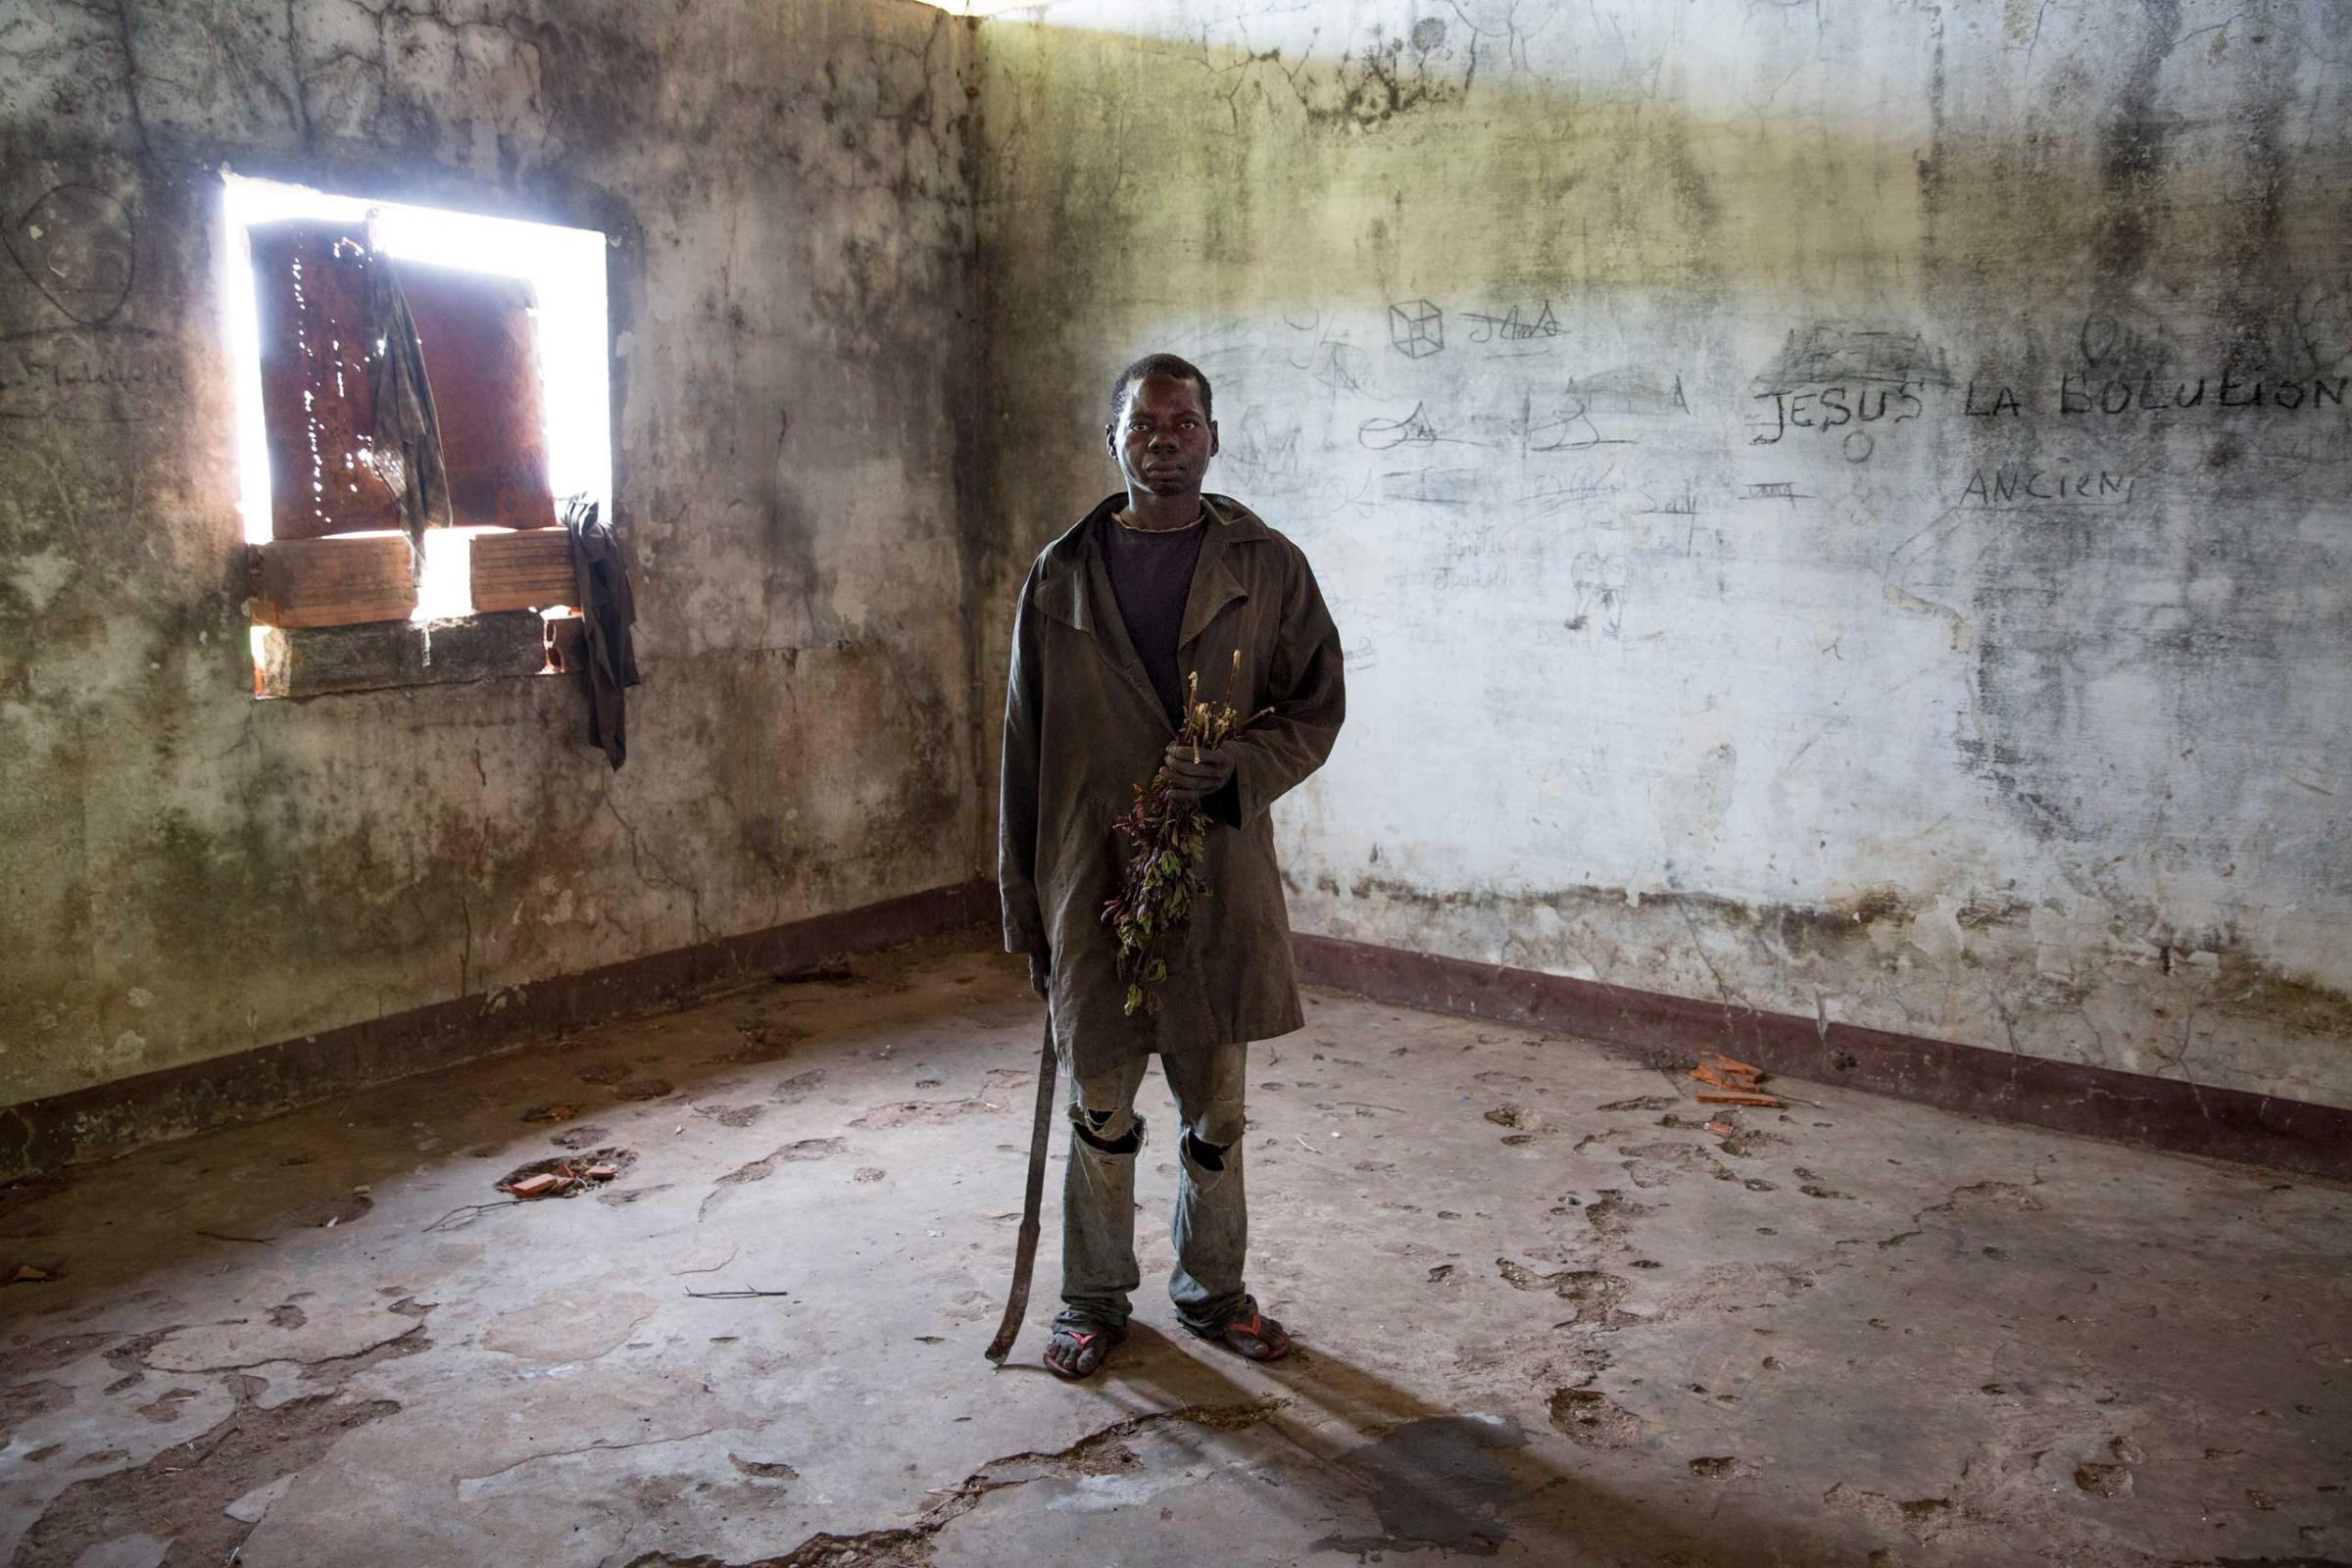 Feb. 2, 2014: A man poses in former Emperor Jean-Bédel Bokassa's compound near the village of Pissa. He is one of the many Christians there, originally recruited by Séléka to become soldiers, but later abandoned by their leader. No food is available so they hunt rats to eat, fearing to leave as they could be considered Séléka collaborators.